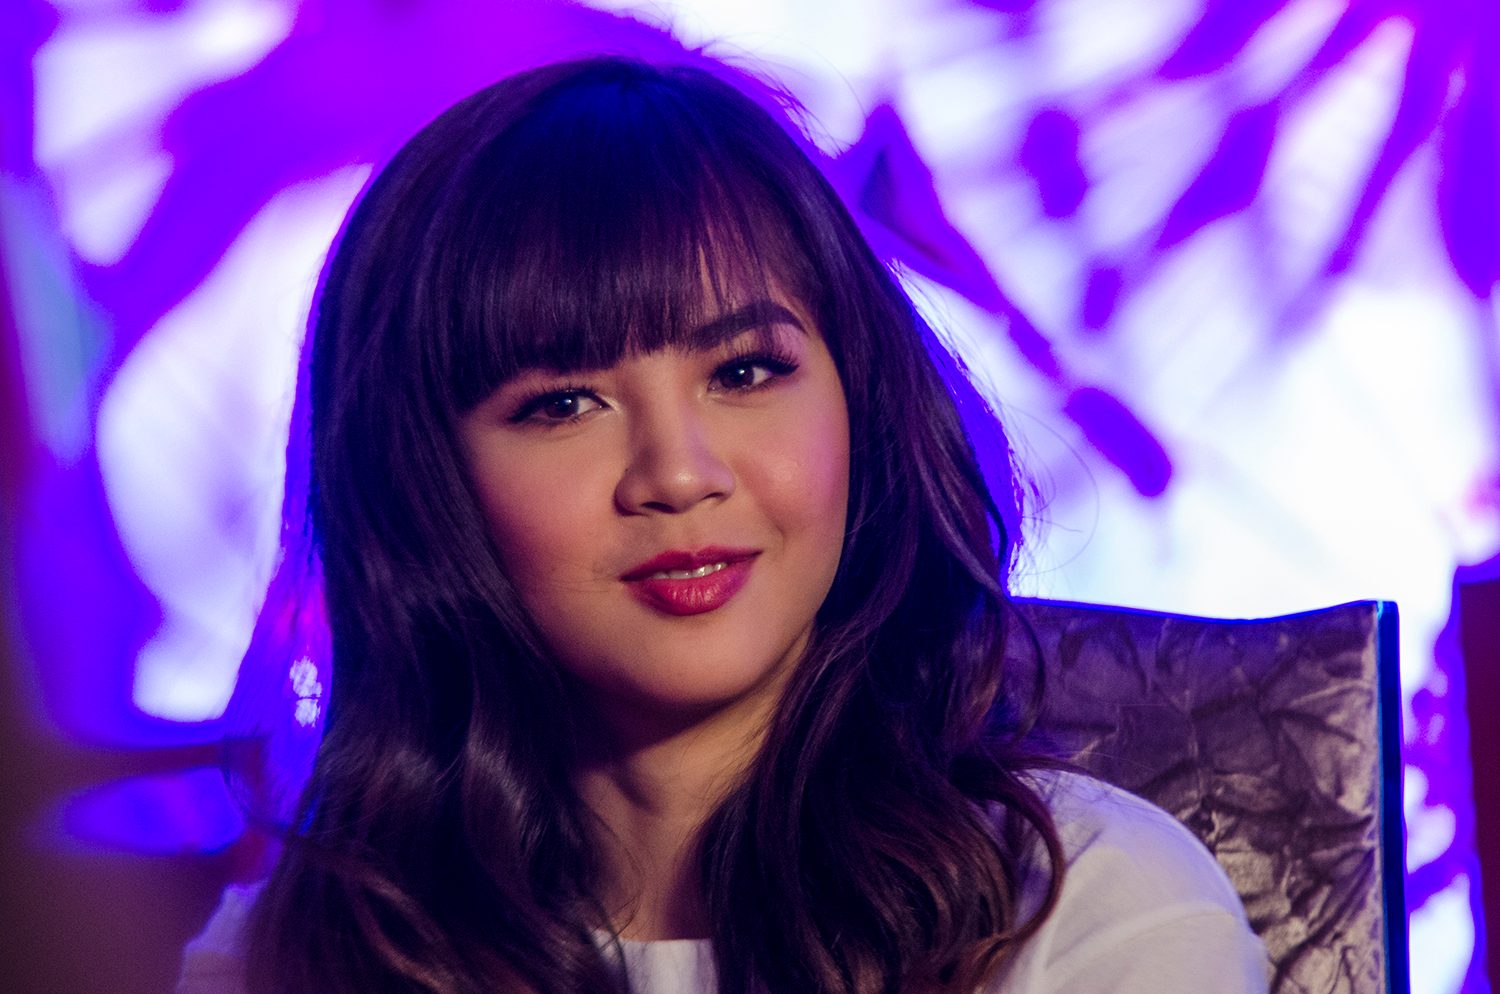 WATCH: Janella Salvador to sing PH version of ‘Moana’ theme